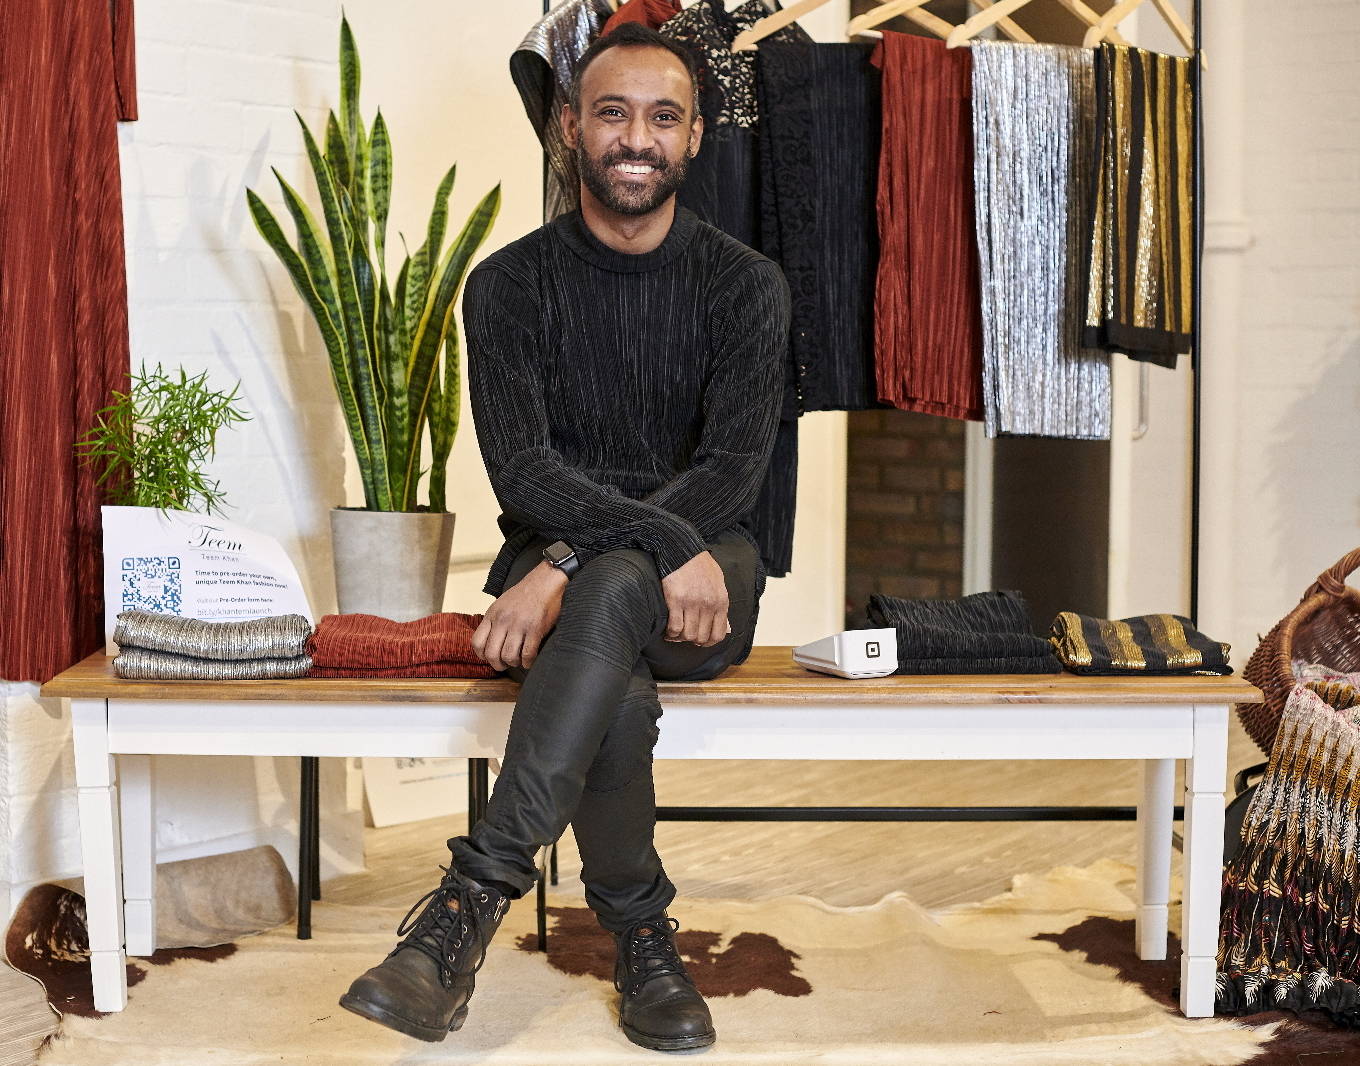 Teem Khan the fashion designer a dressed in black and smiling and sitting on a wooden bench amid clothing that the has designed with green plants in the background